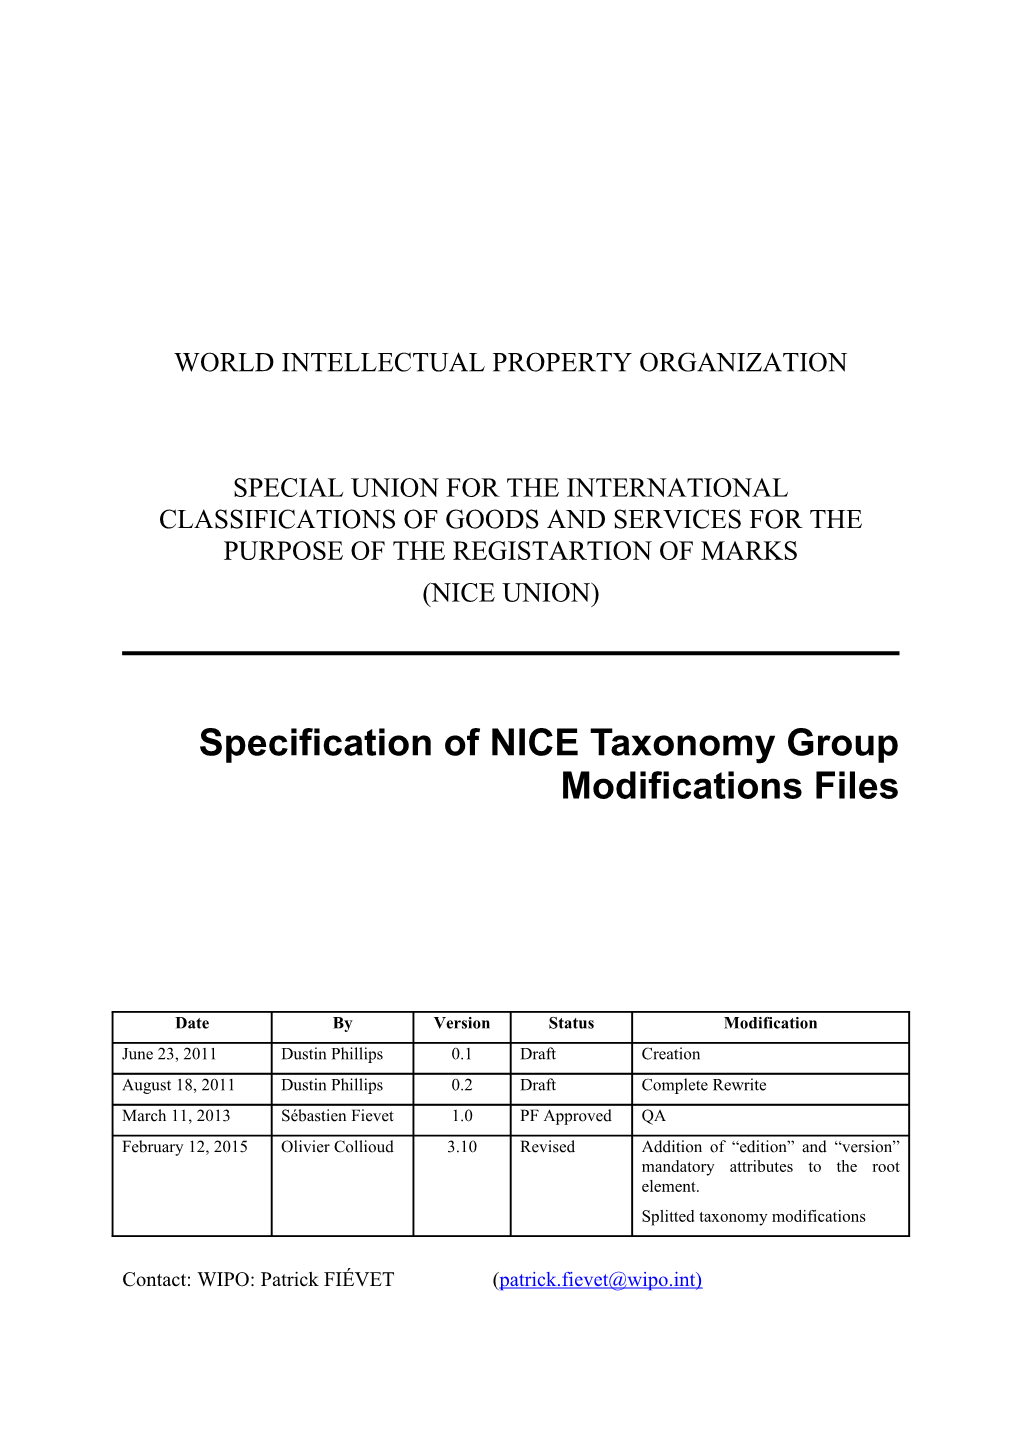 Specification of NICE Taxonomy Group Modifications Files